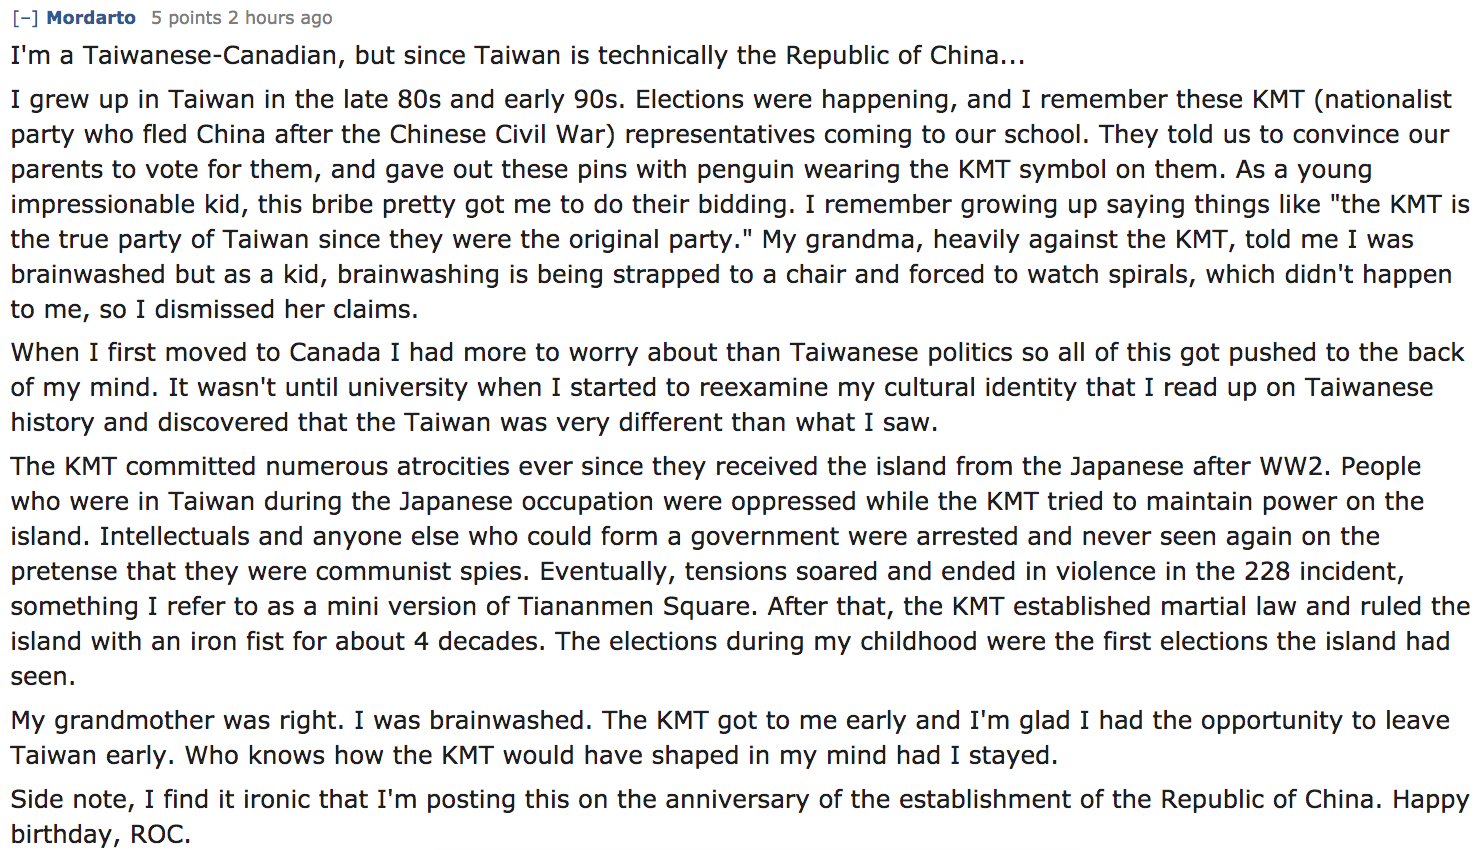 I'm a TaiwaneseCanadian, but since Taiwan is technically the Republic of China... I grew up in Taiwan in the late 80s and early 90s. Elections were happening, and I remember these Kmt nationalist party who fled